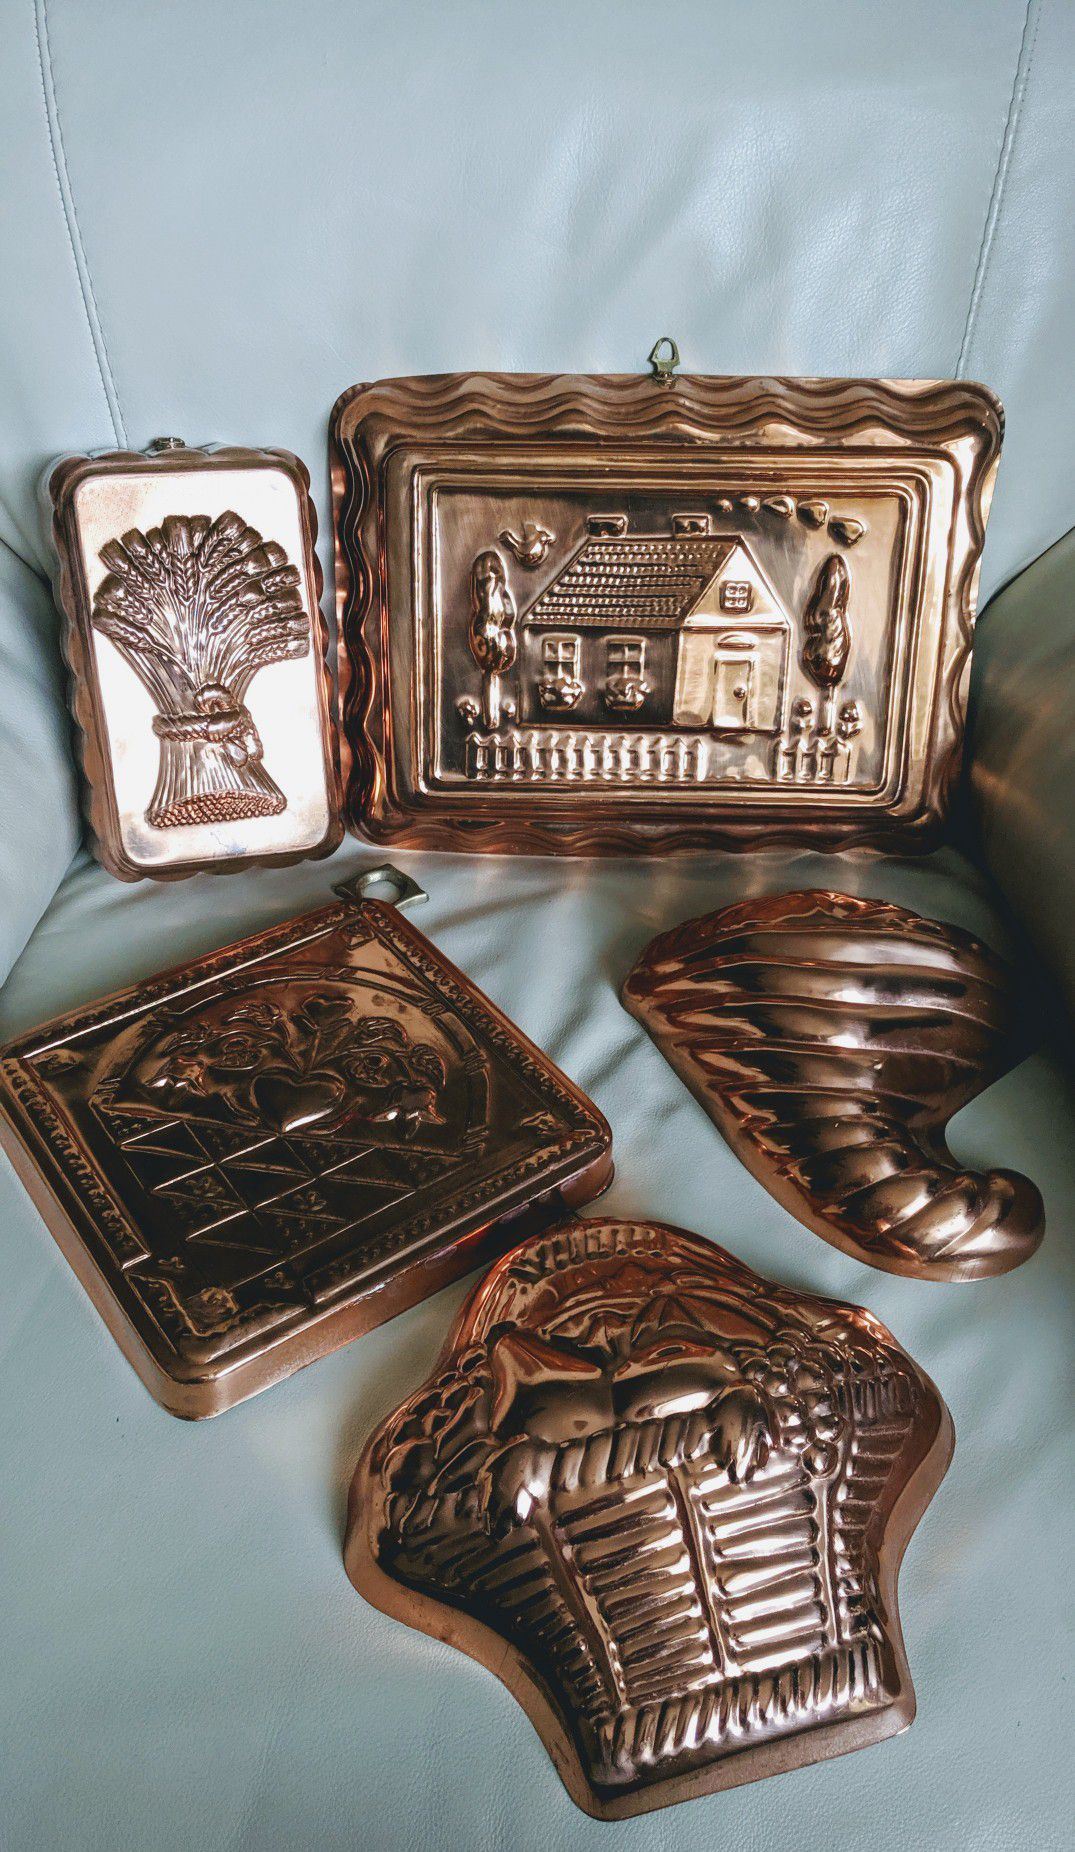 Baking metal molds pans, copper gilded larger vintage set of 5 kitchen accessories wall decor.